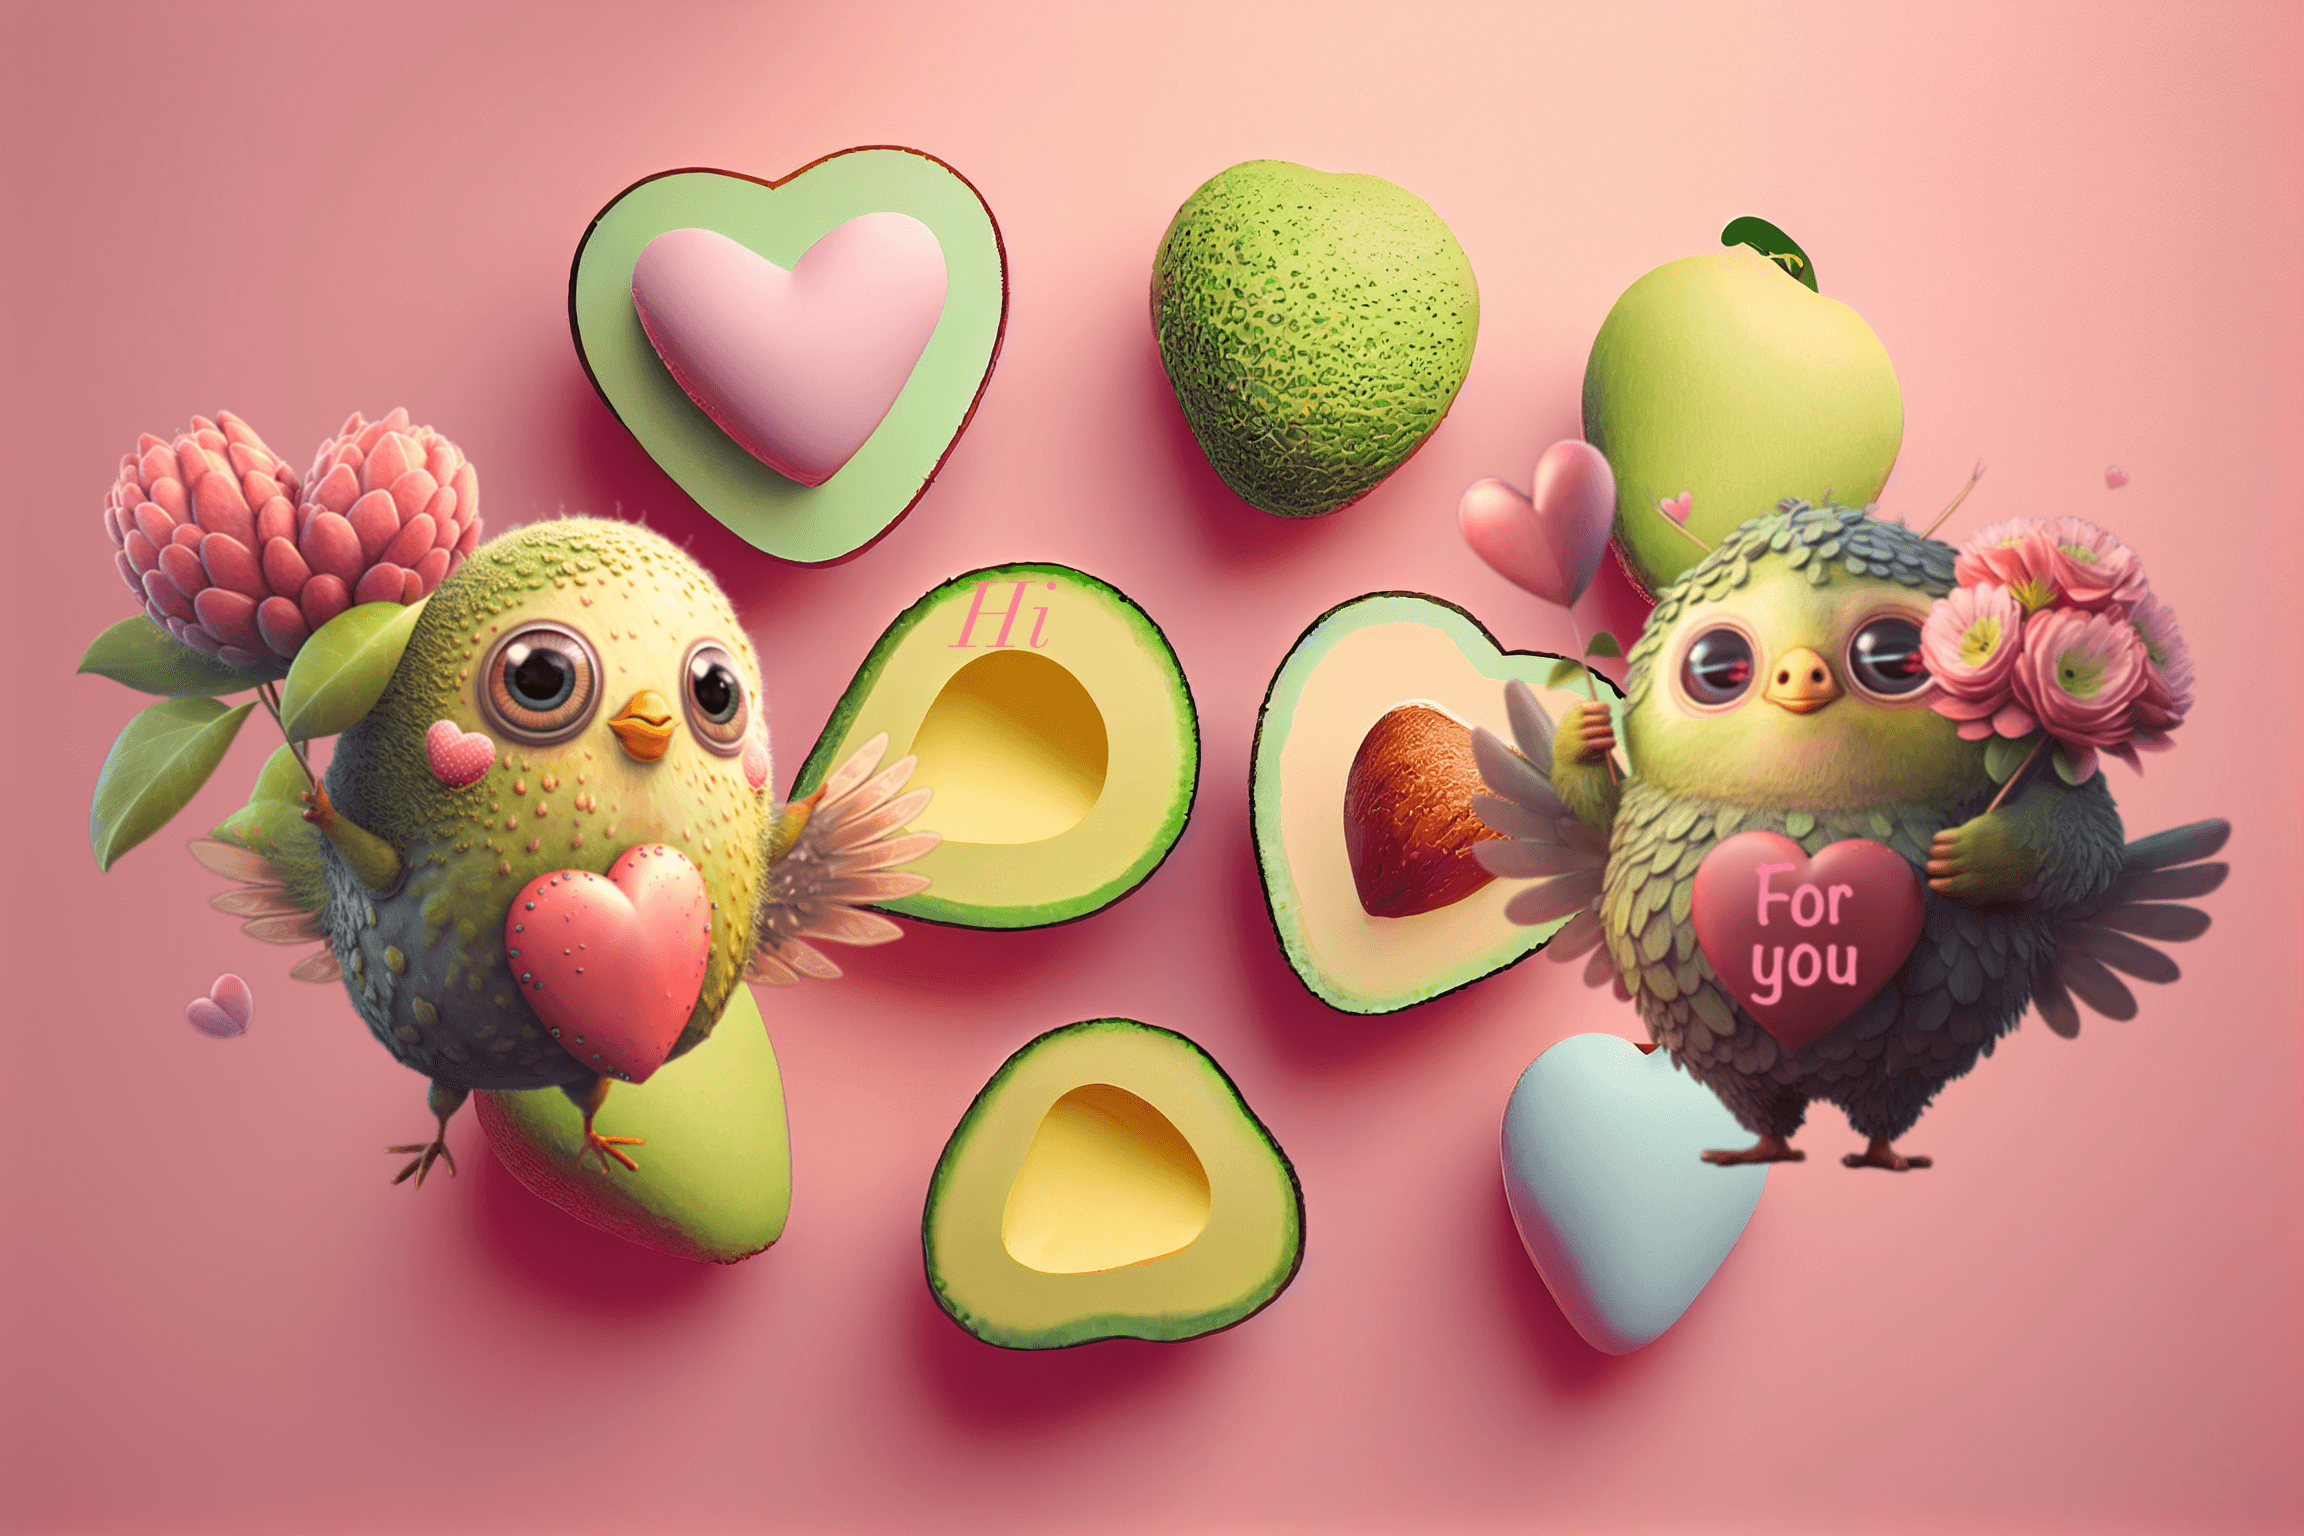 Avocado chick wishes  NFT collection cruzo